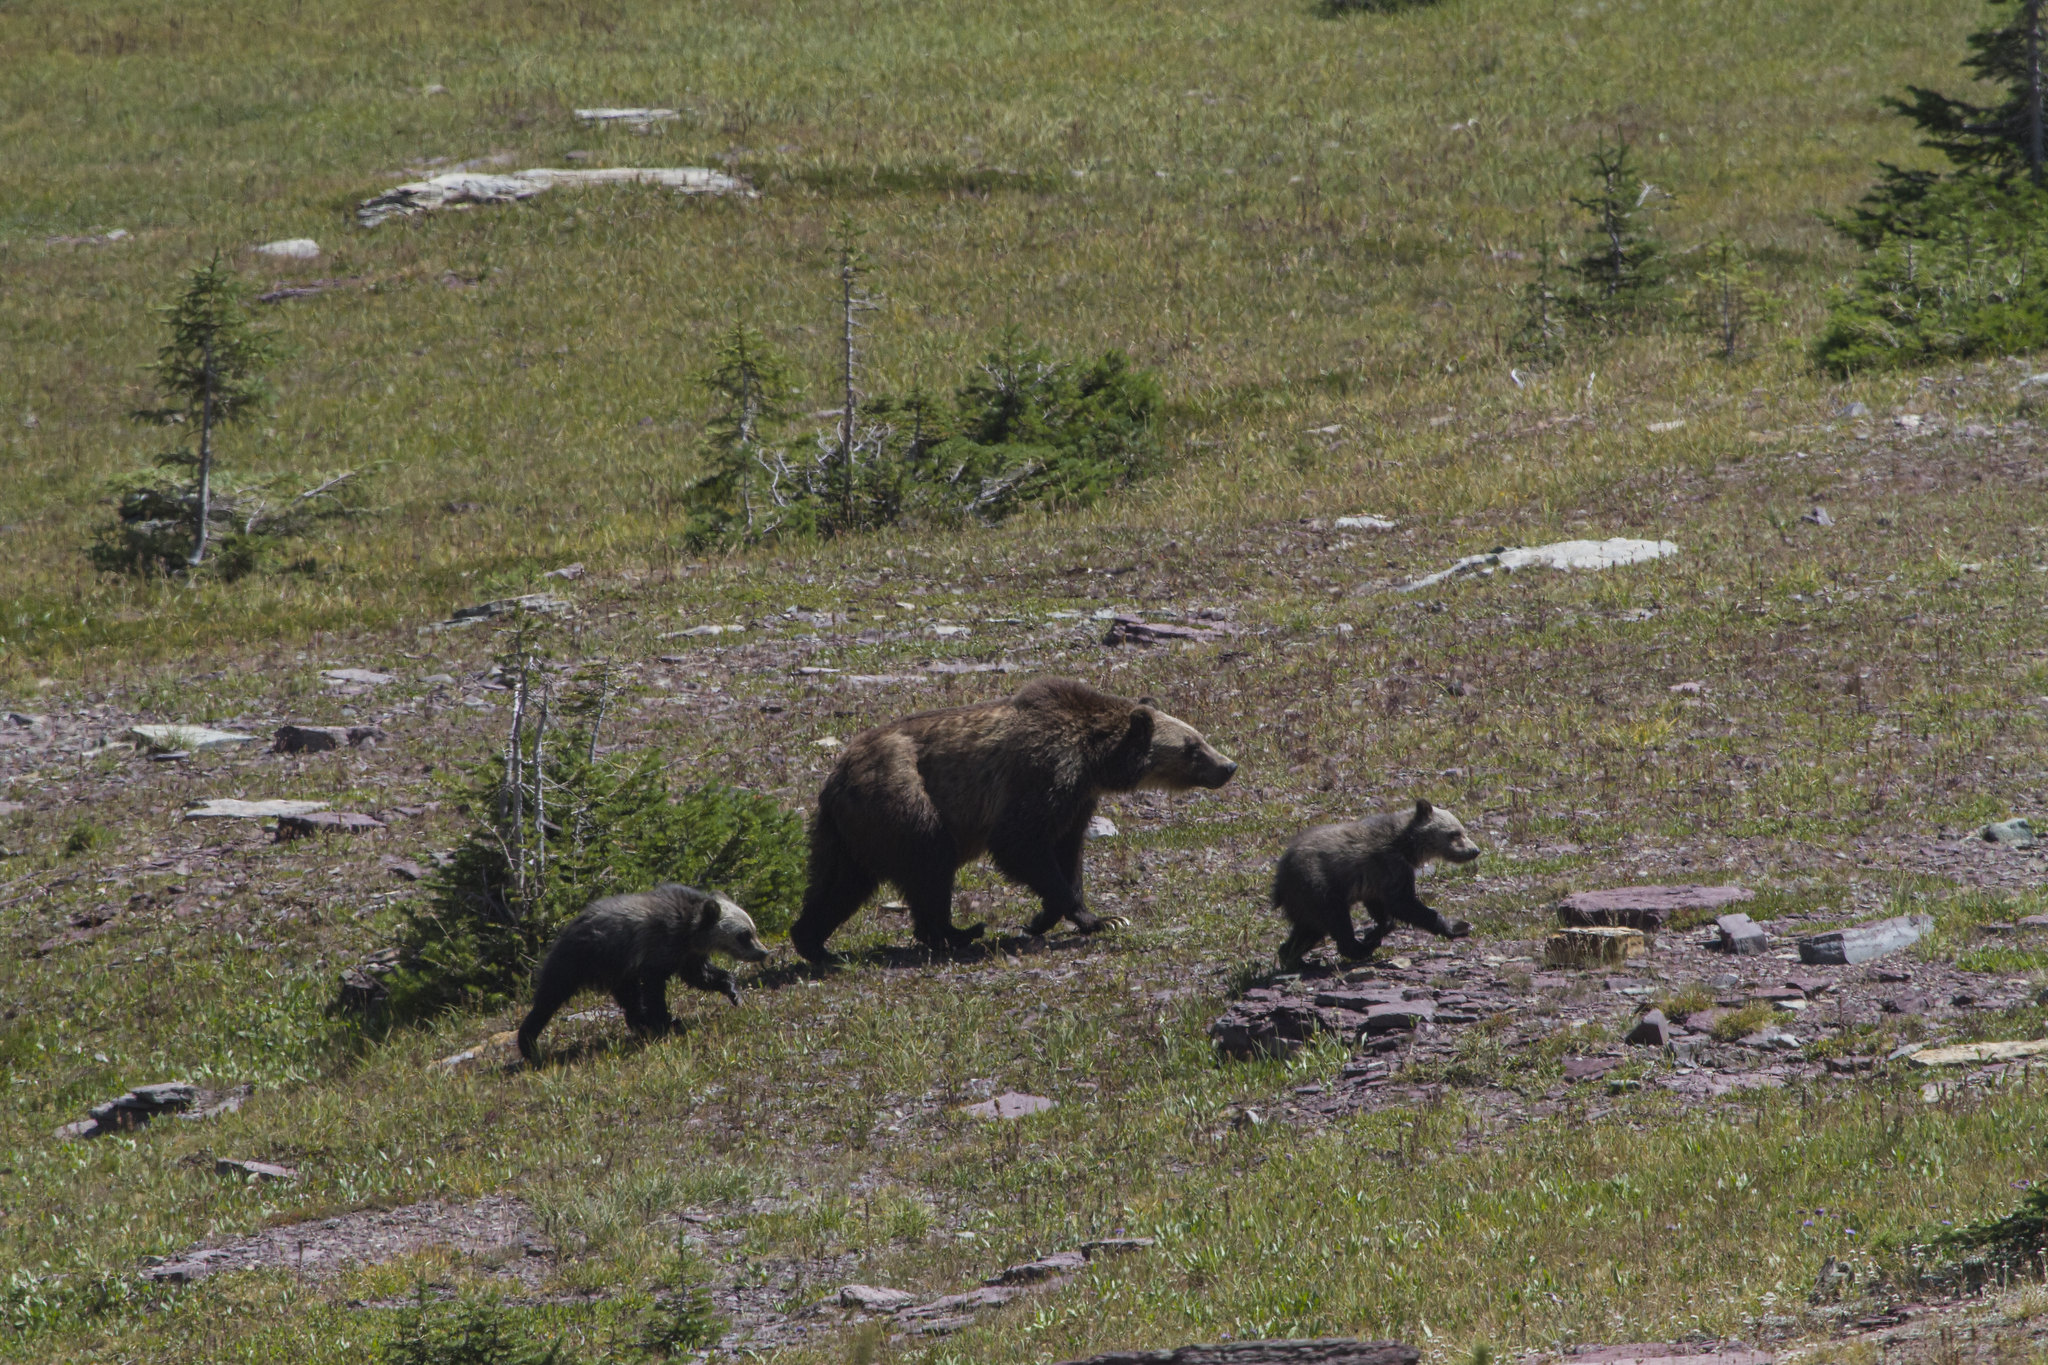 A grizzly sow walks with her cubs in Yellowstone.